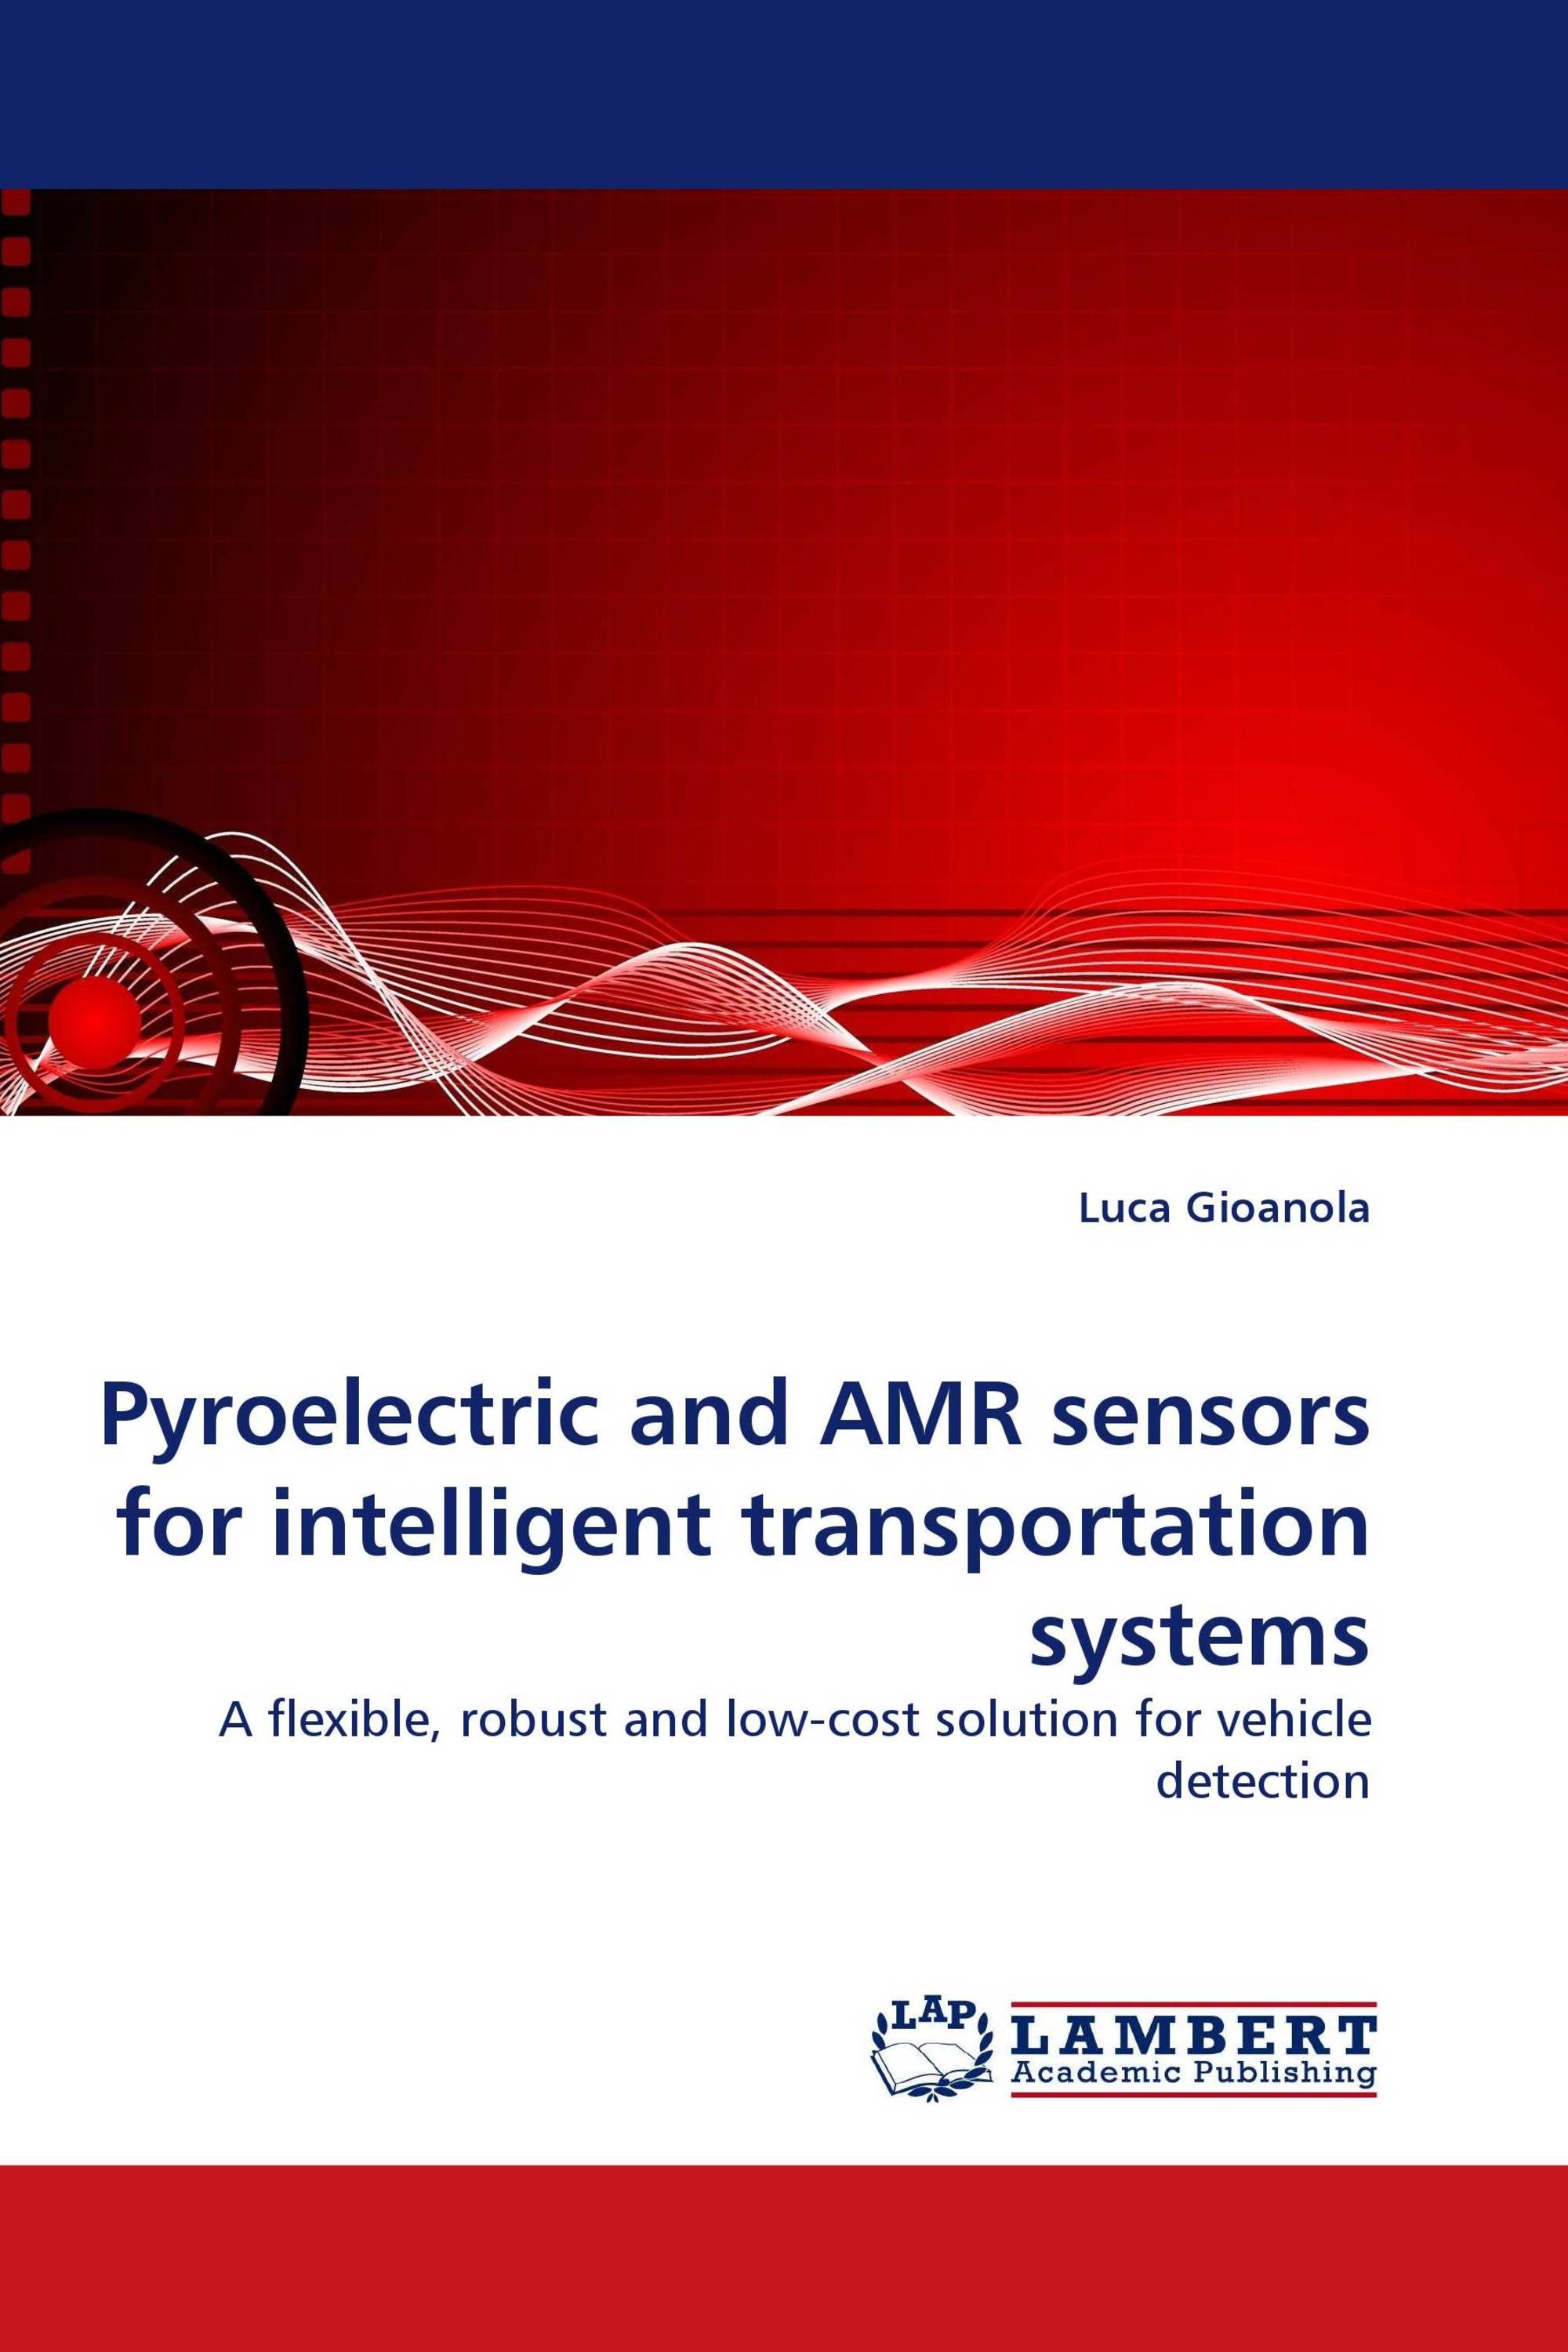 Pyroelectric and AMR sensors for intelligent transportation systems